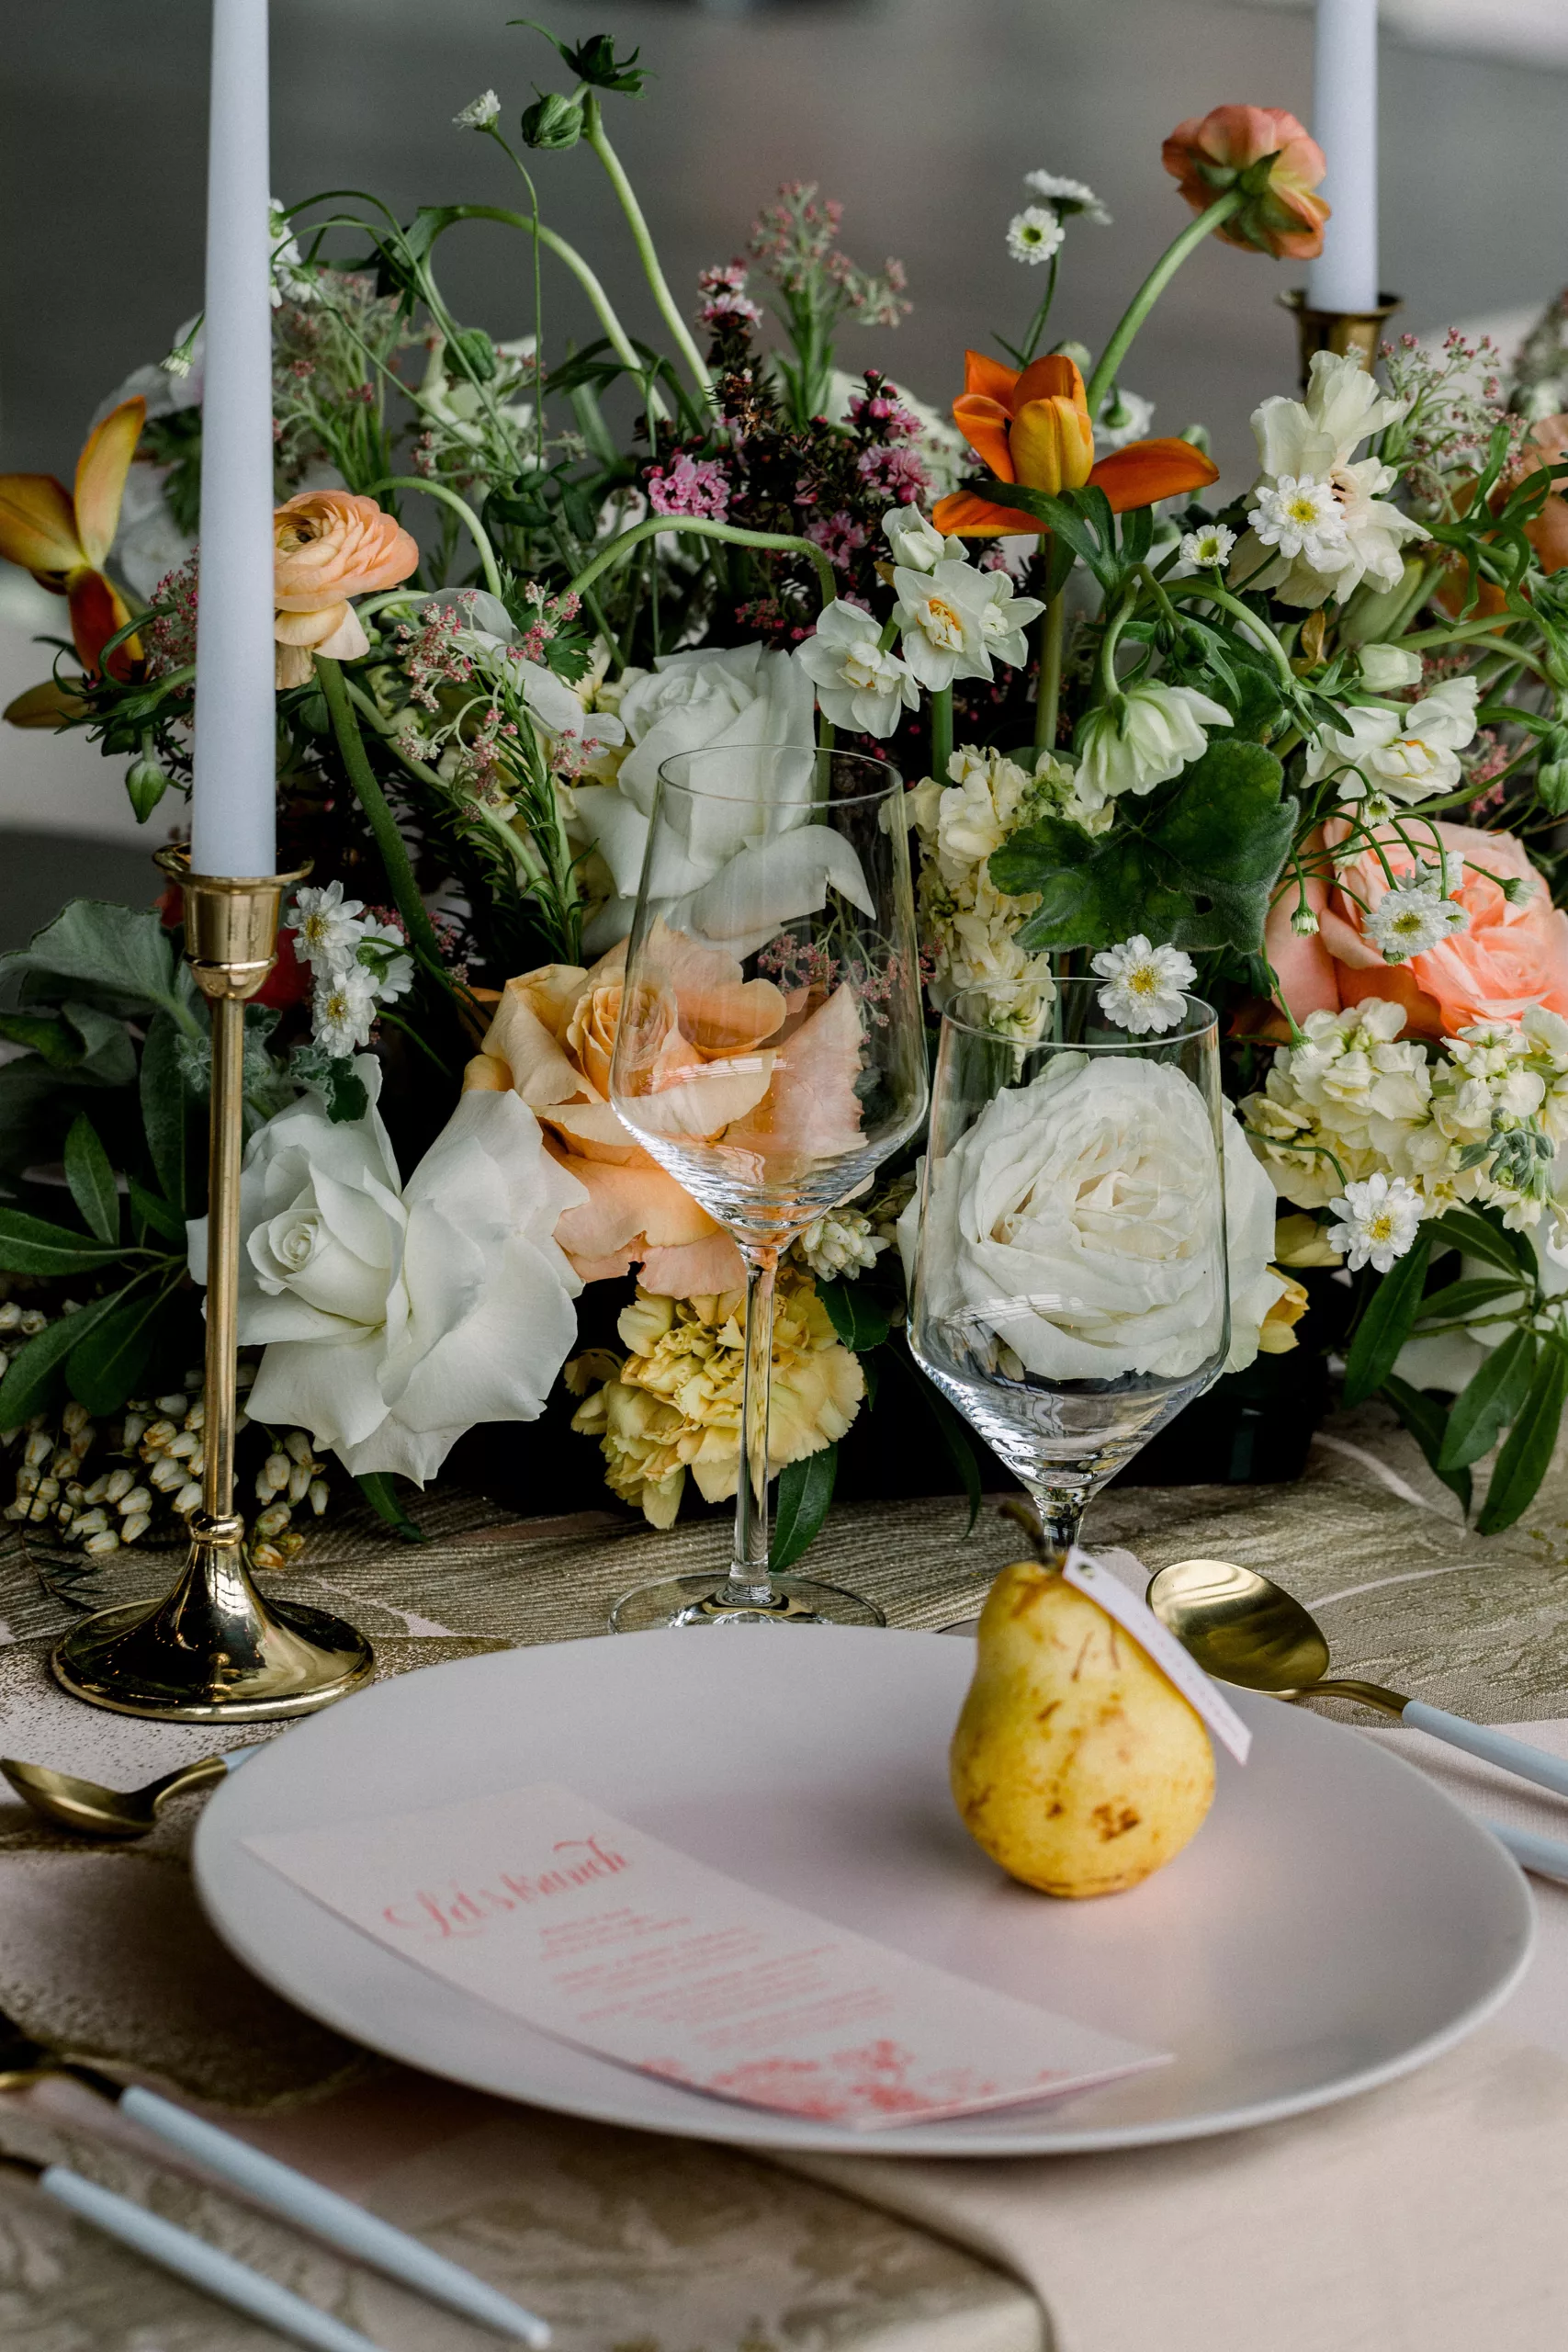 Details of a table setting with colorful florals and white candles on a wood table